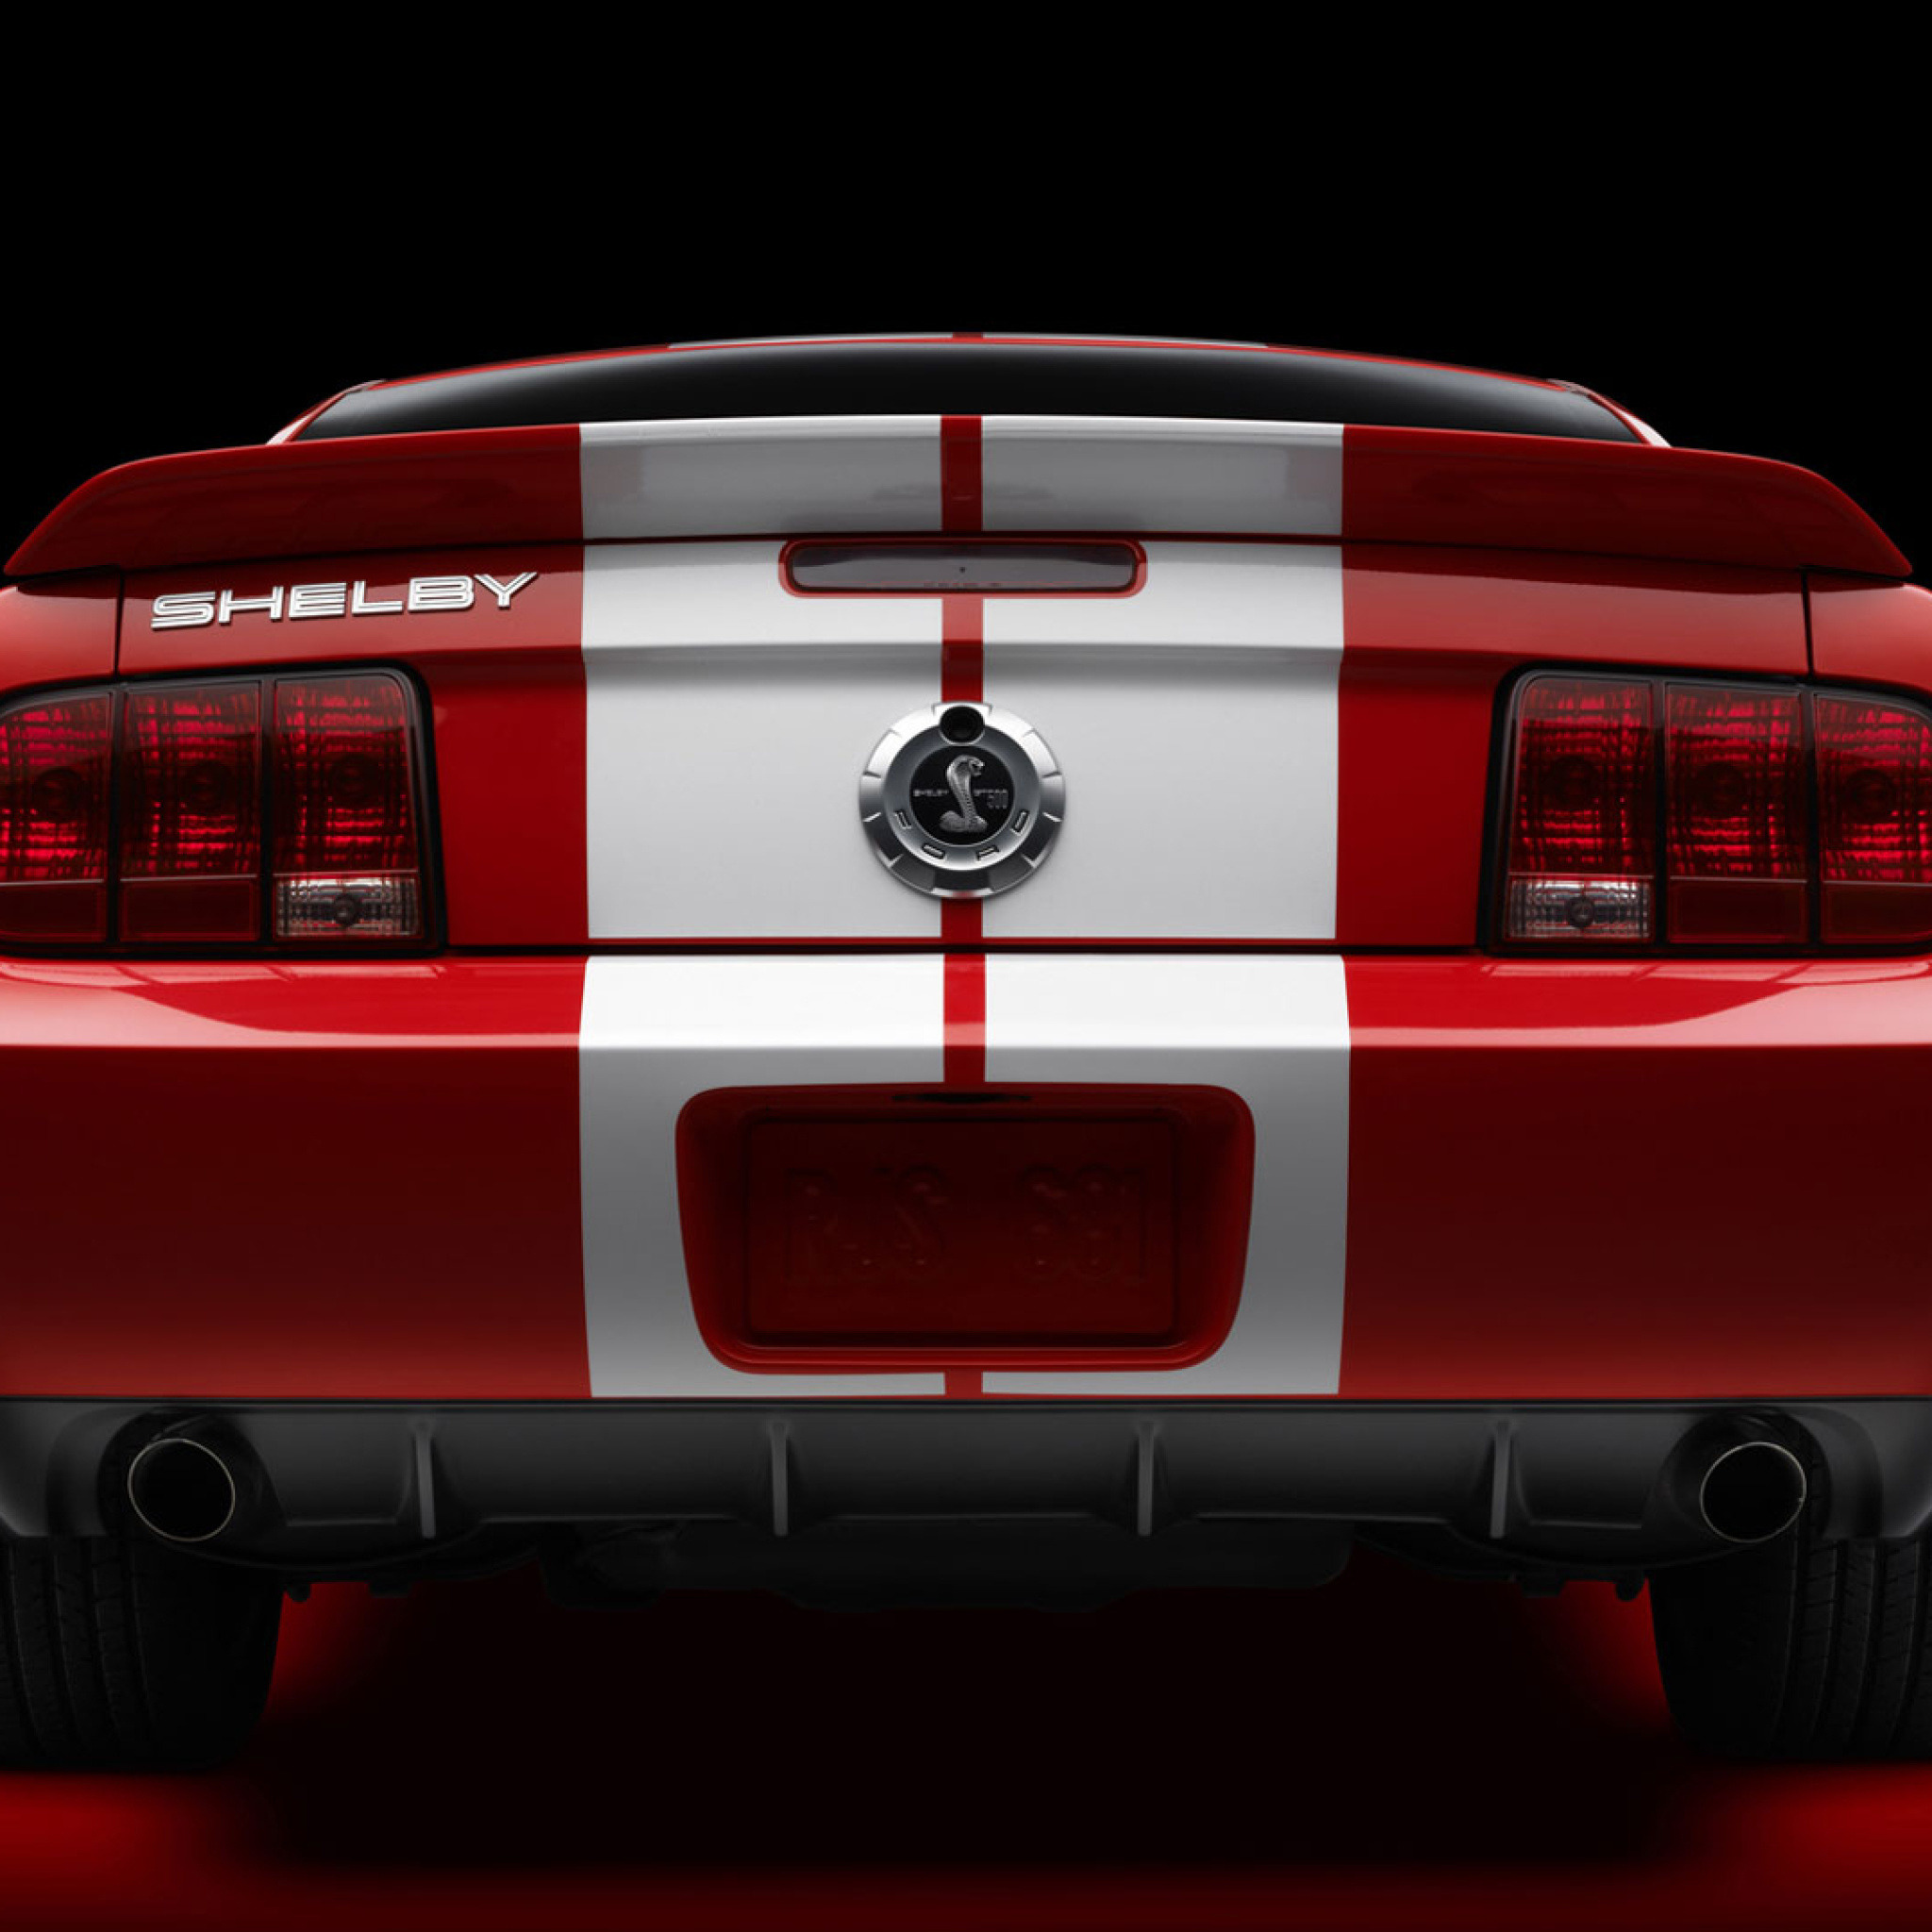 Ford Mustang Shelby GT500 wallpaper 2048x2048